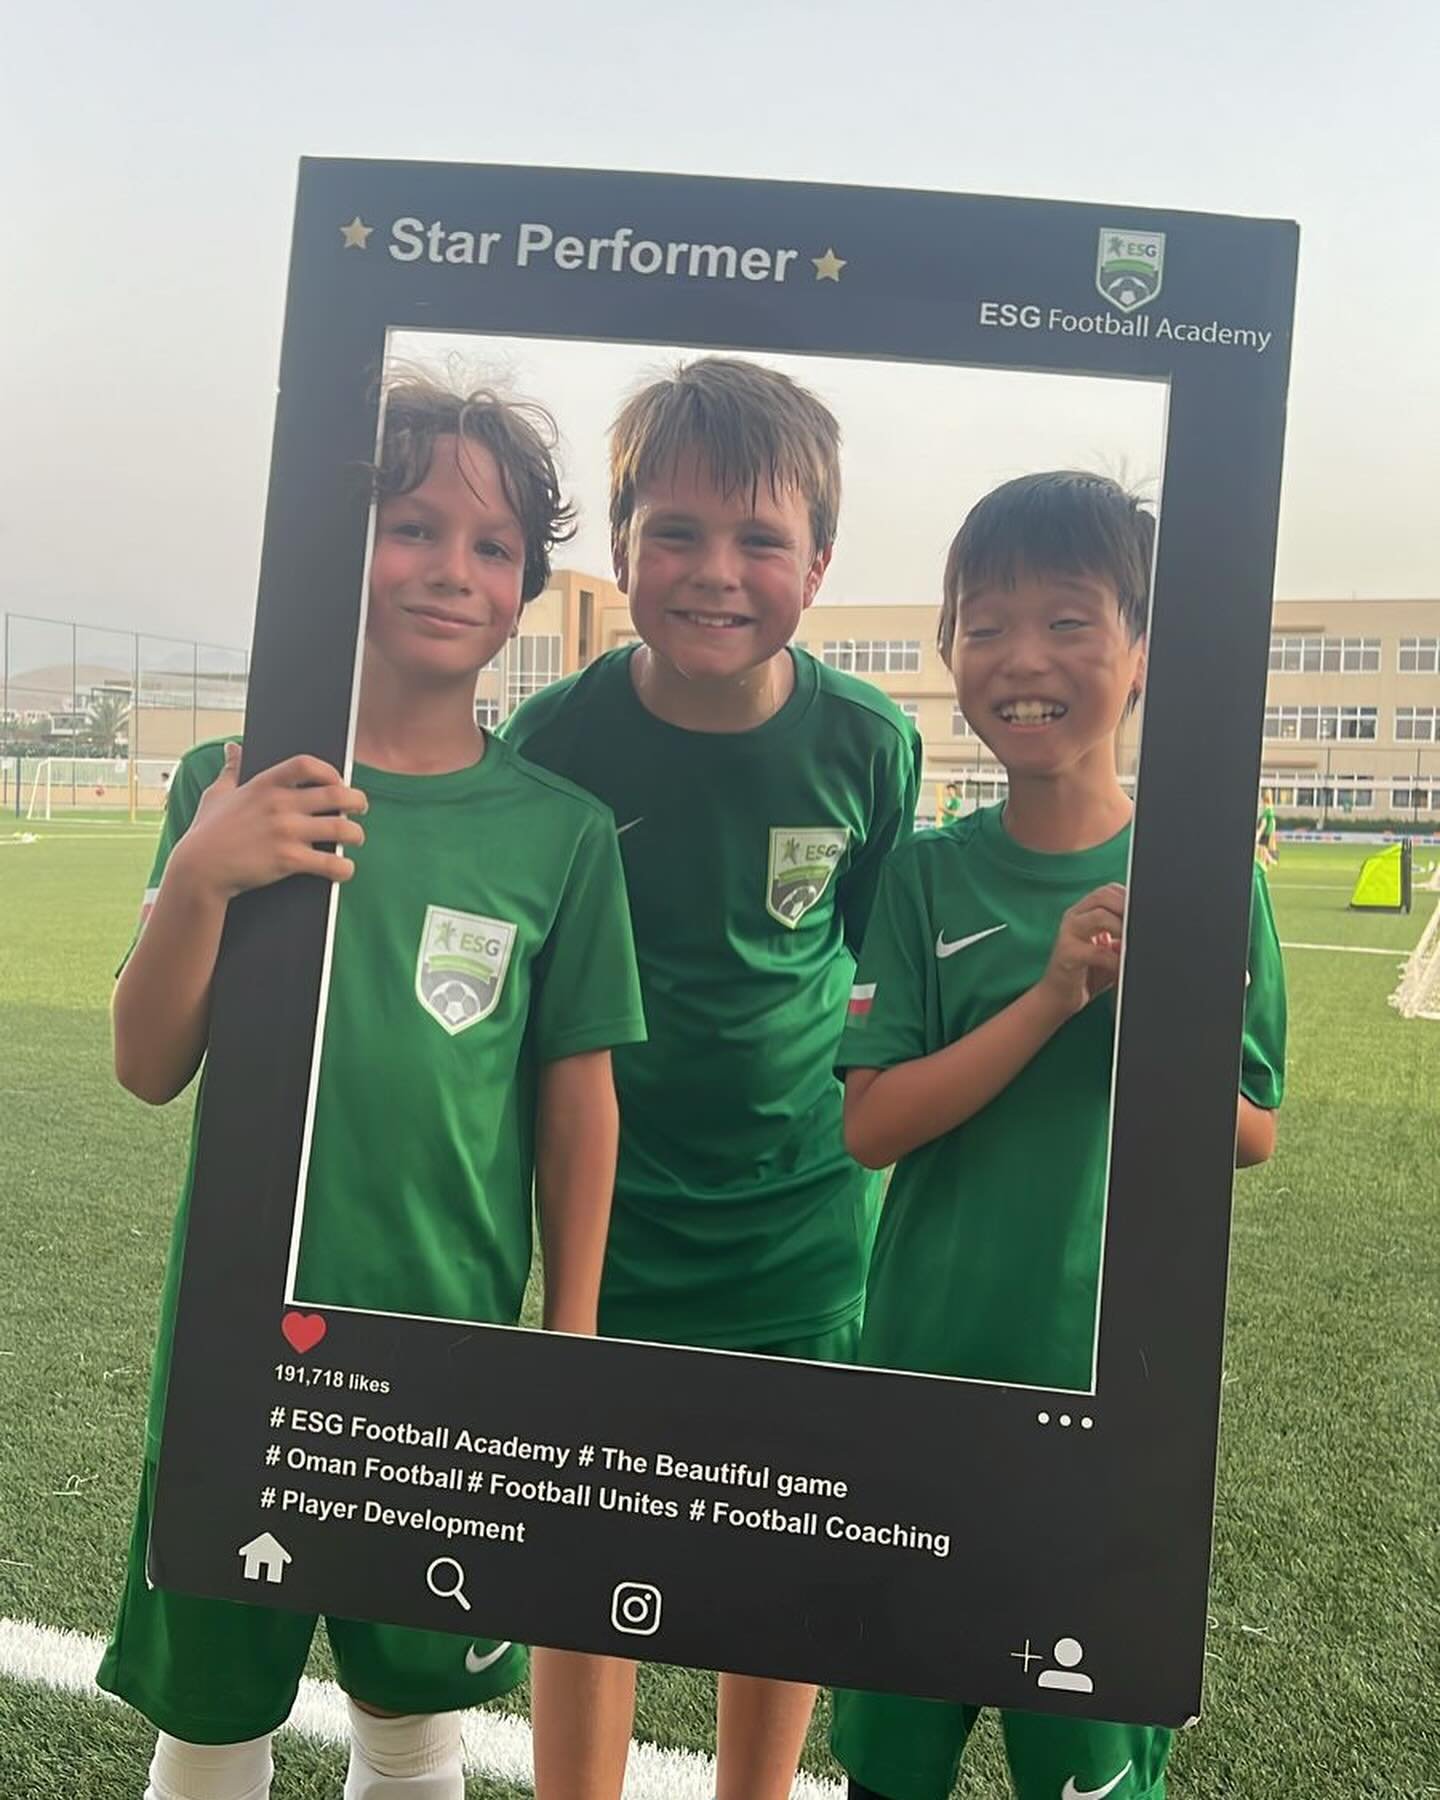 ESG Football Academy Star 💫 Performers from Term 4 , Week 2.
A massive well done to you all for your efforts. 👏🏽 ⚽️💚🇴🇲👏🏽
#esgfootballacademy #starperformer #soccer #omanfootball #thebeautifulgame #lovefootball❤️⚽️ #footballunites